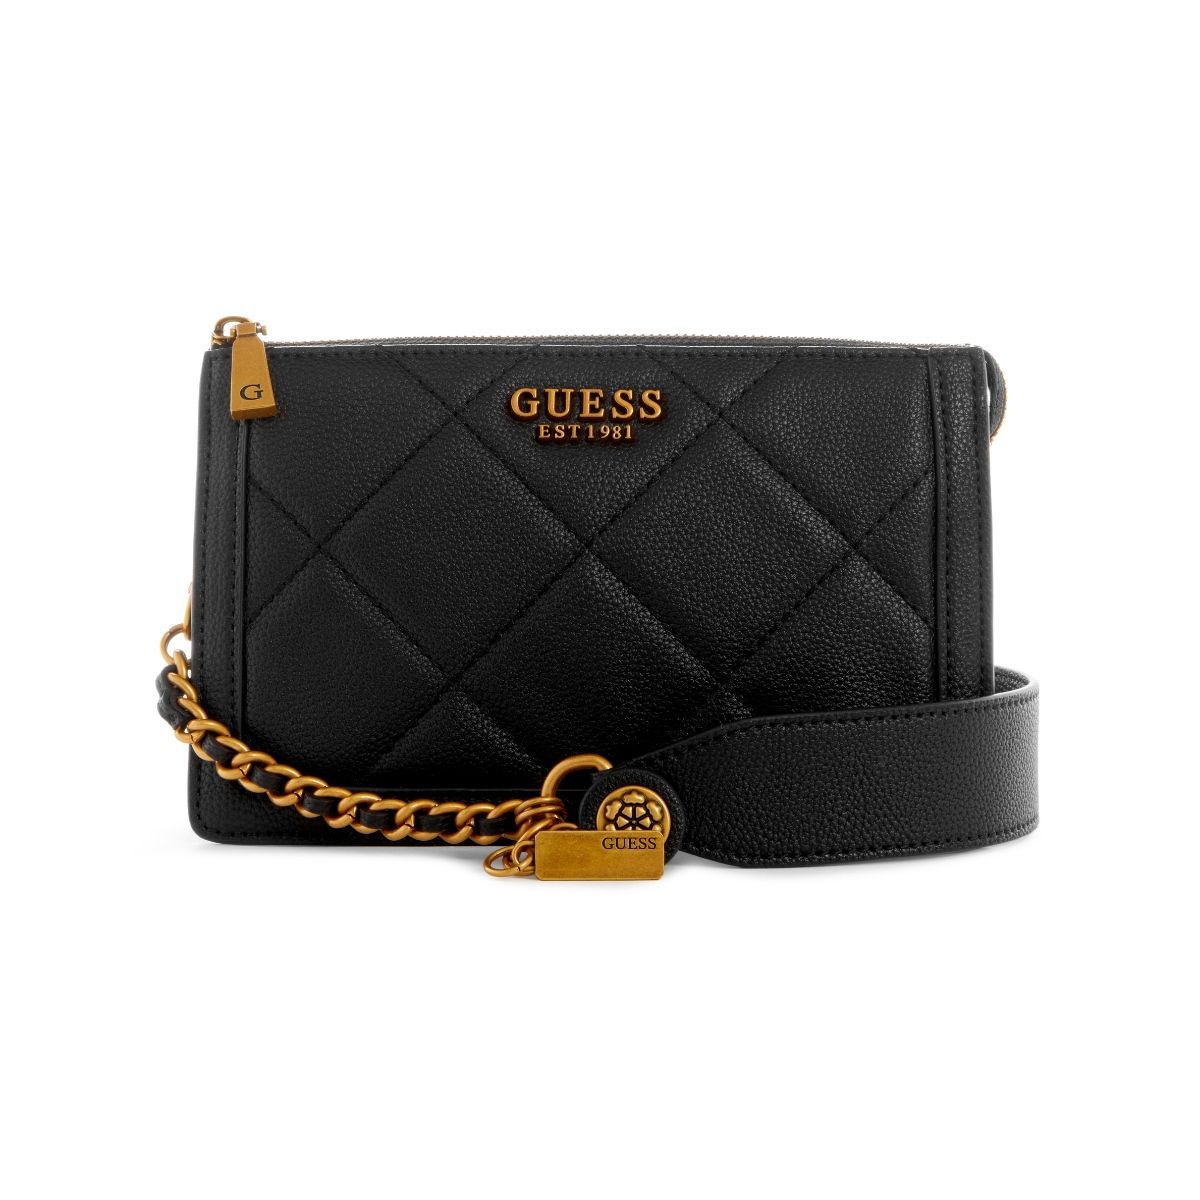 GUESS Bags